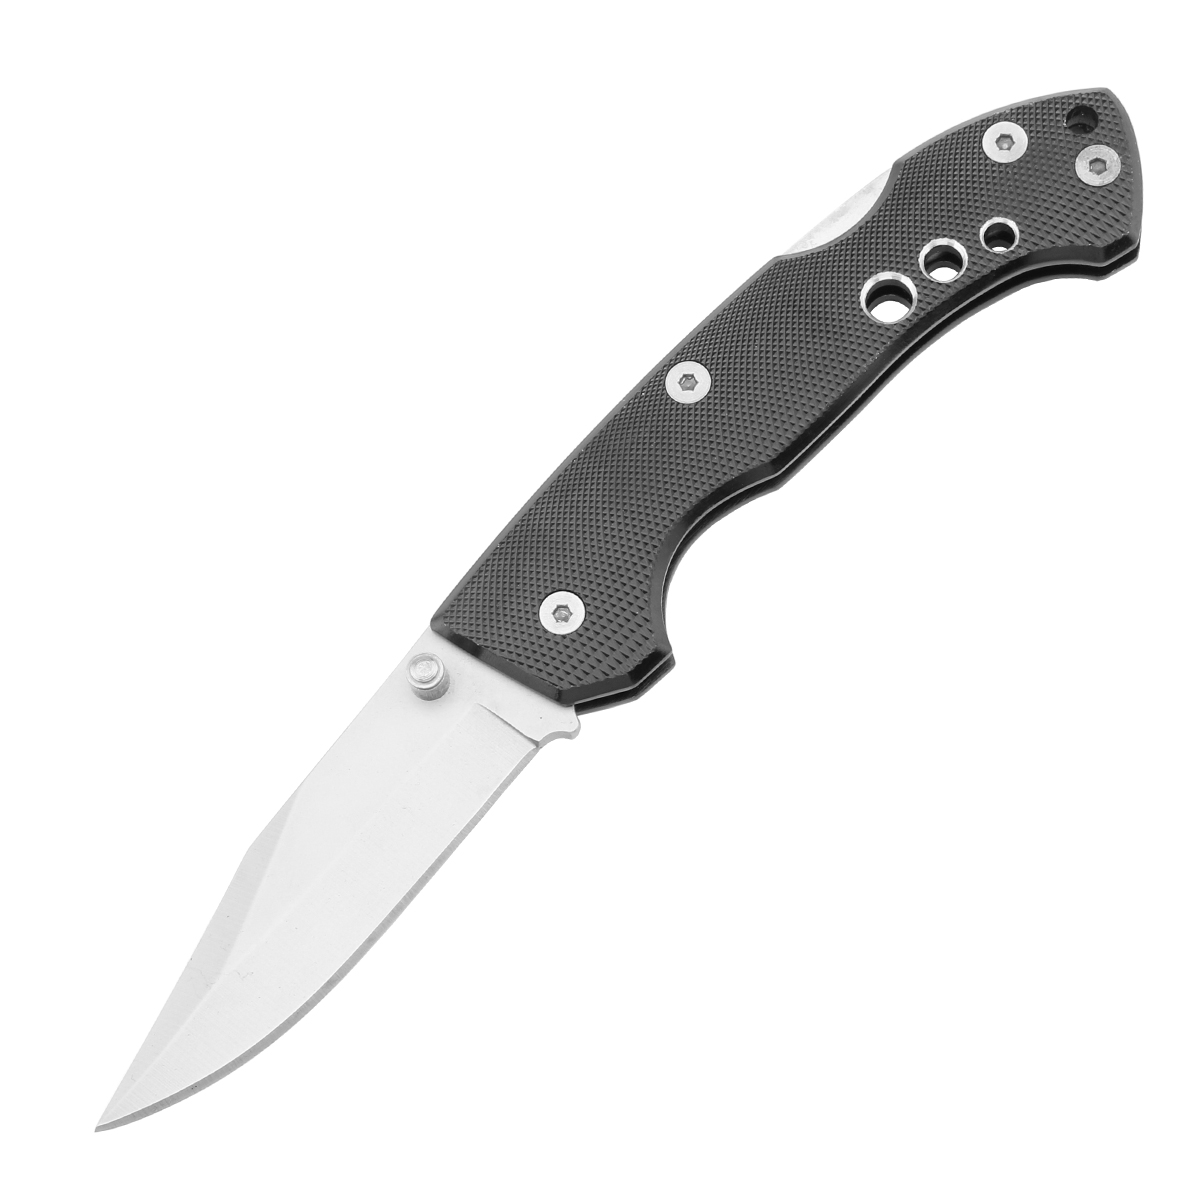 High Quality Camping Tactical Knife